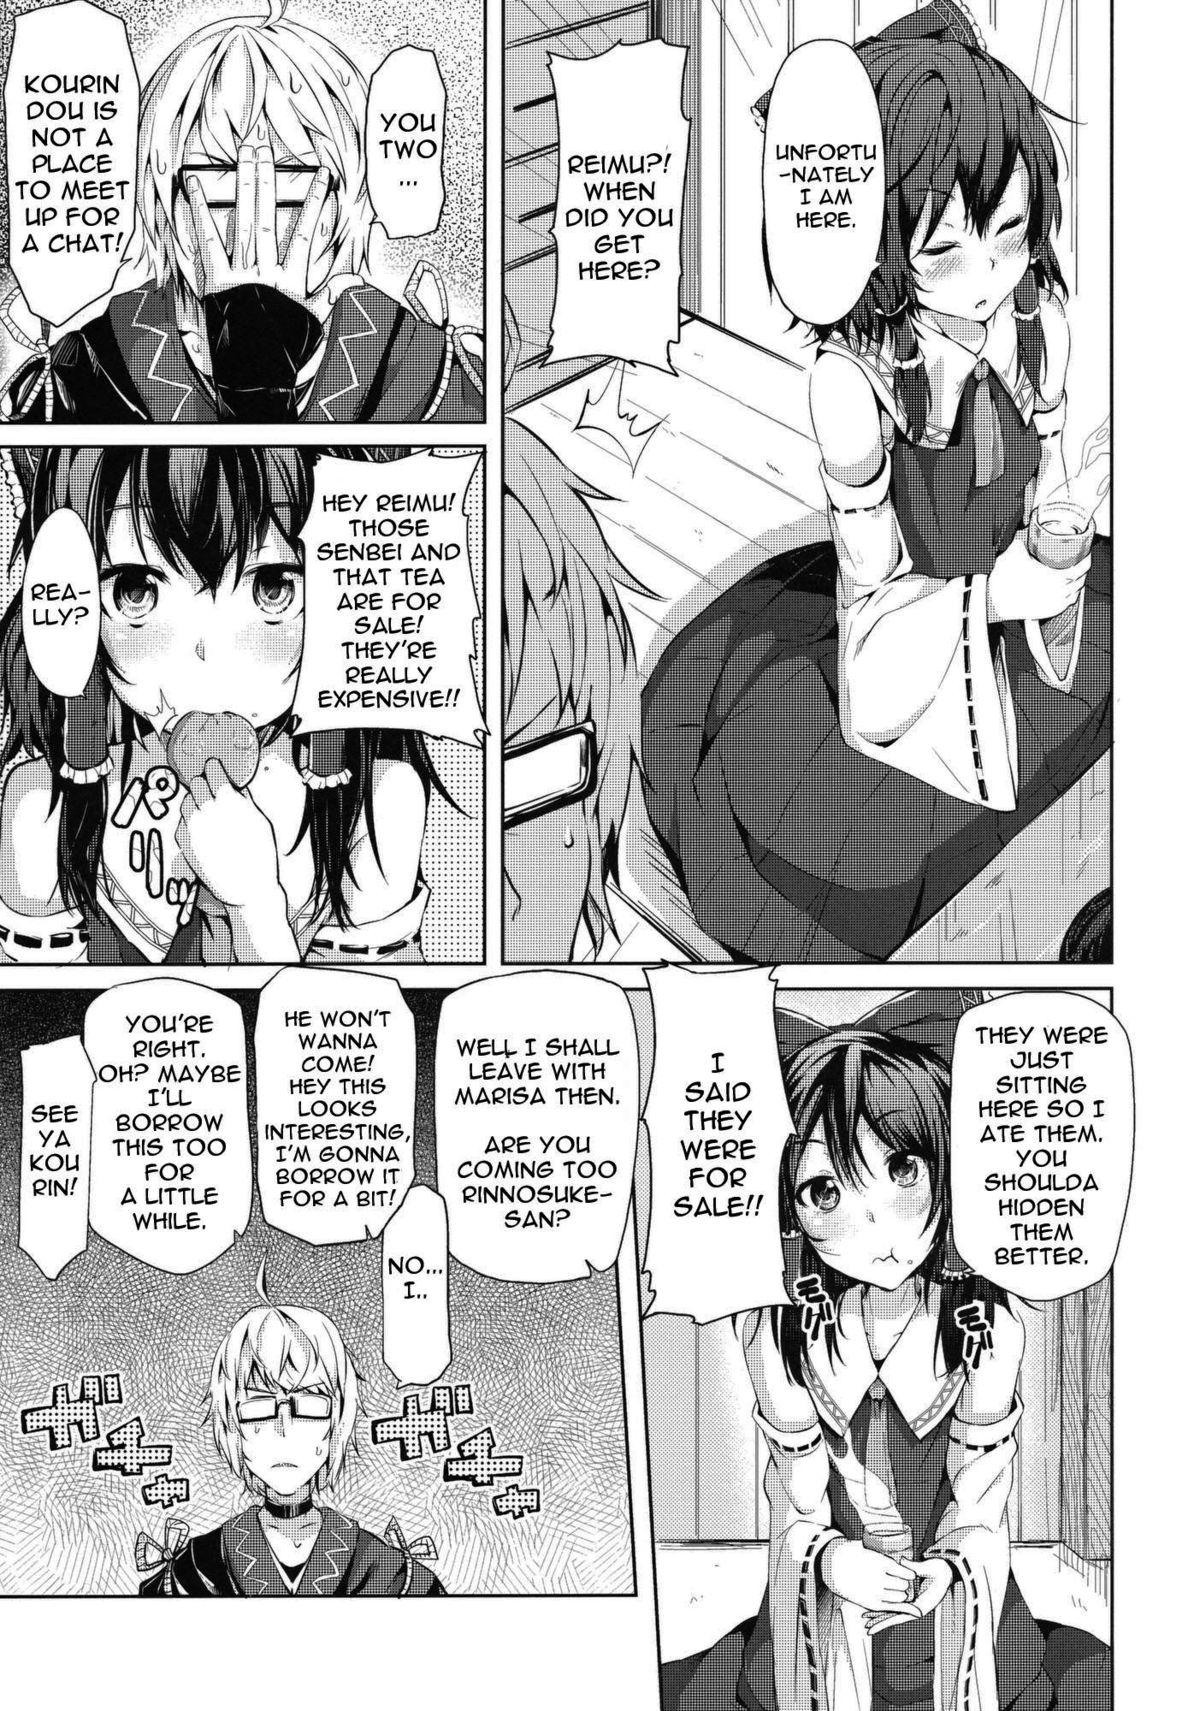 Girl Gets Fucked Zutto Kourin no Turn! Turn 1 me | It's Always Kourin's Turn - First Turn - Touhou project Titfuck - Page 6